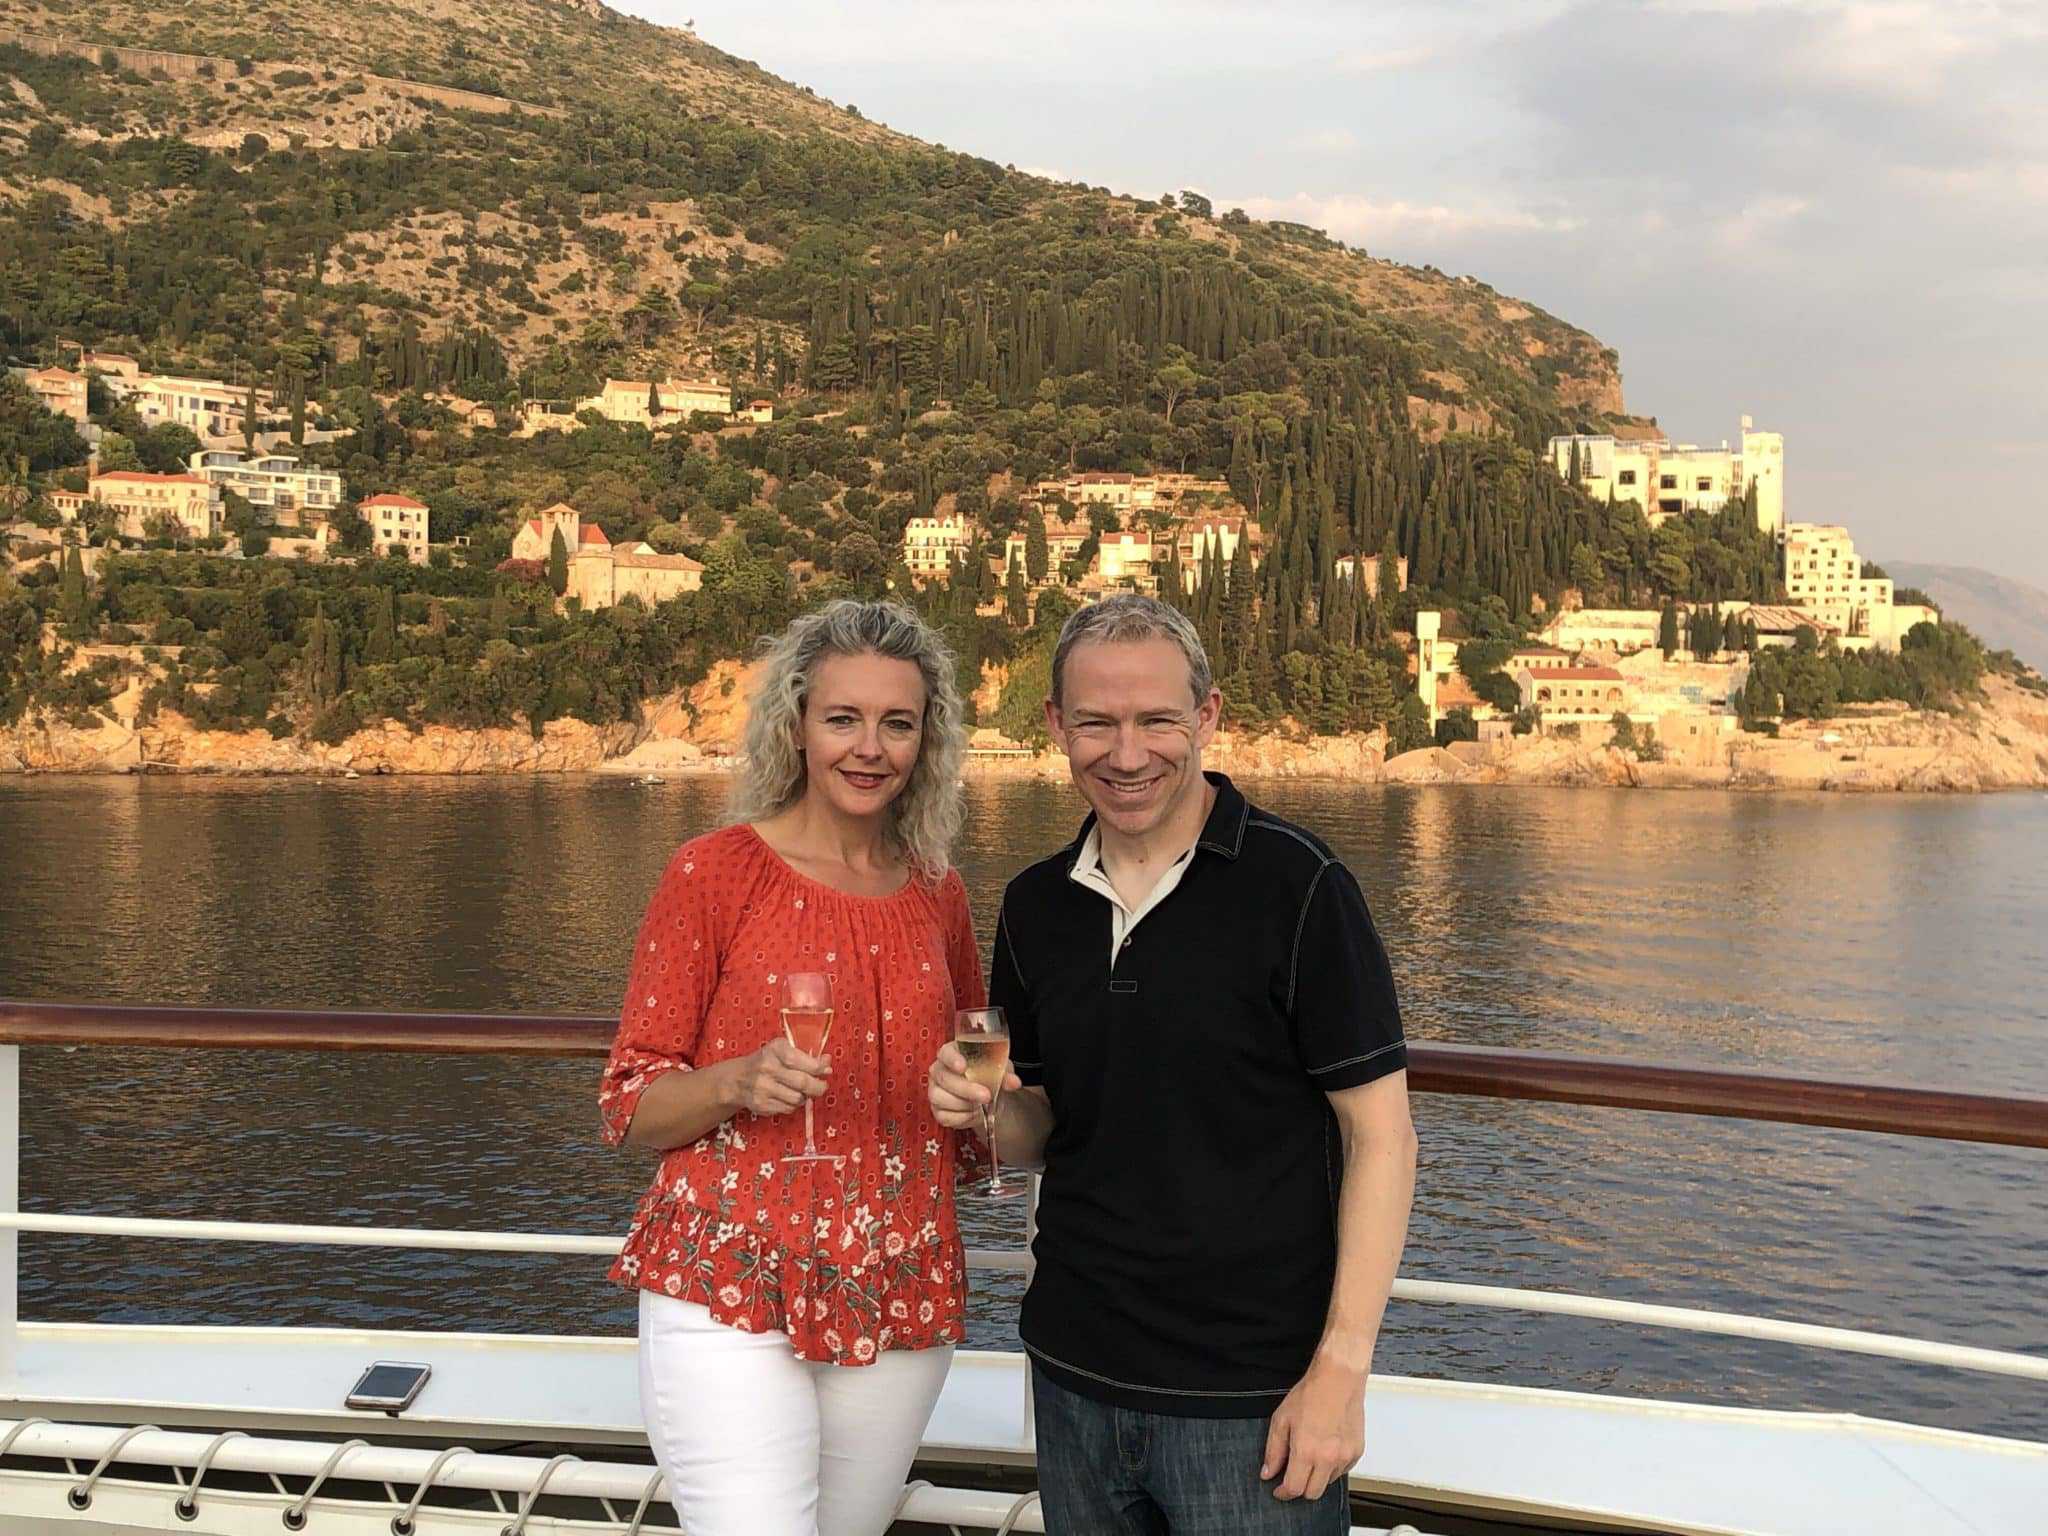 Review of our Venice & the Dalmatian Coast Cruise with